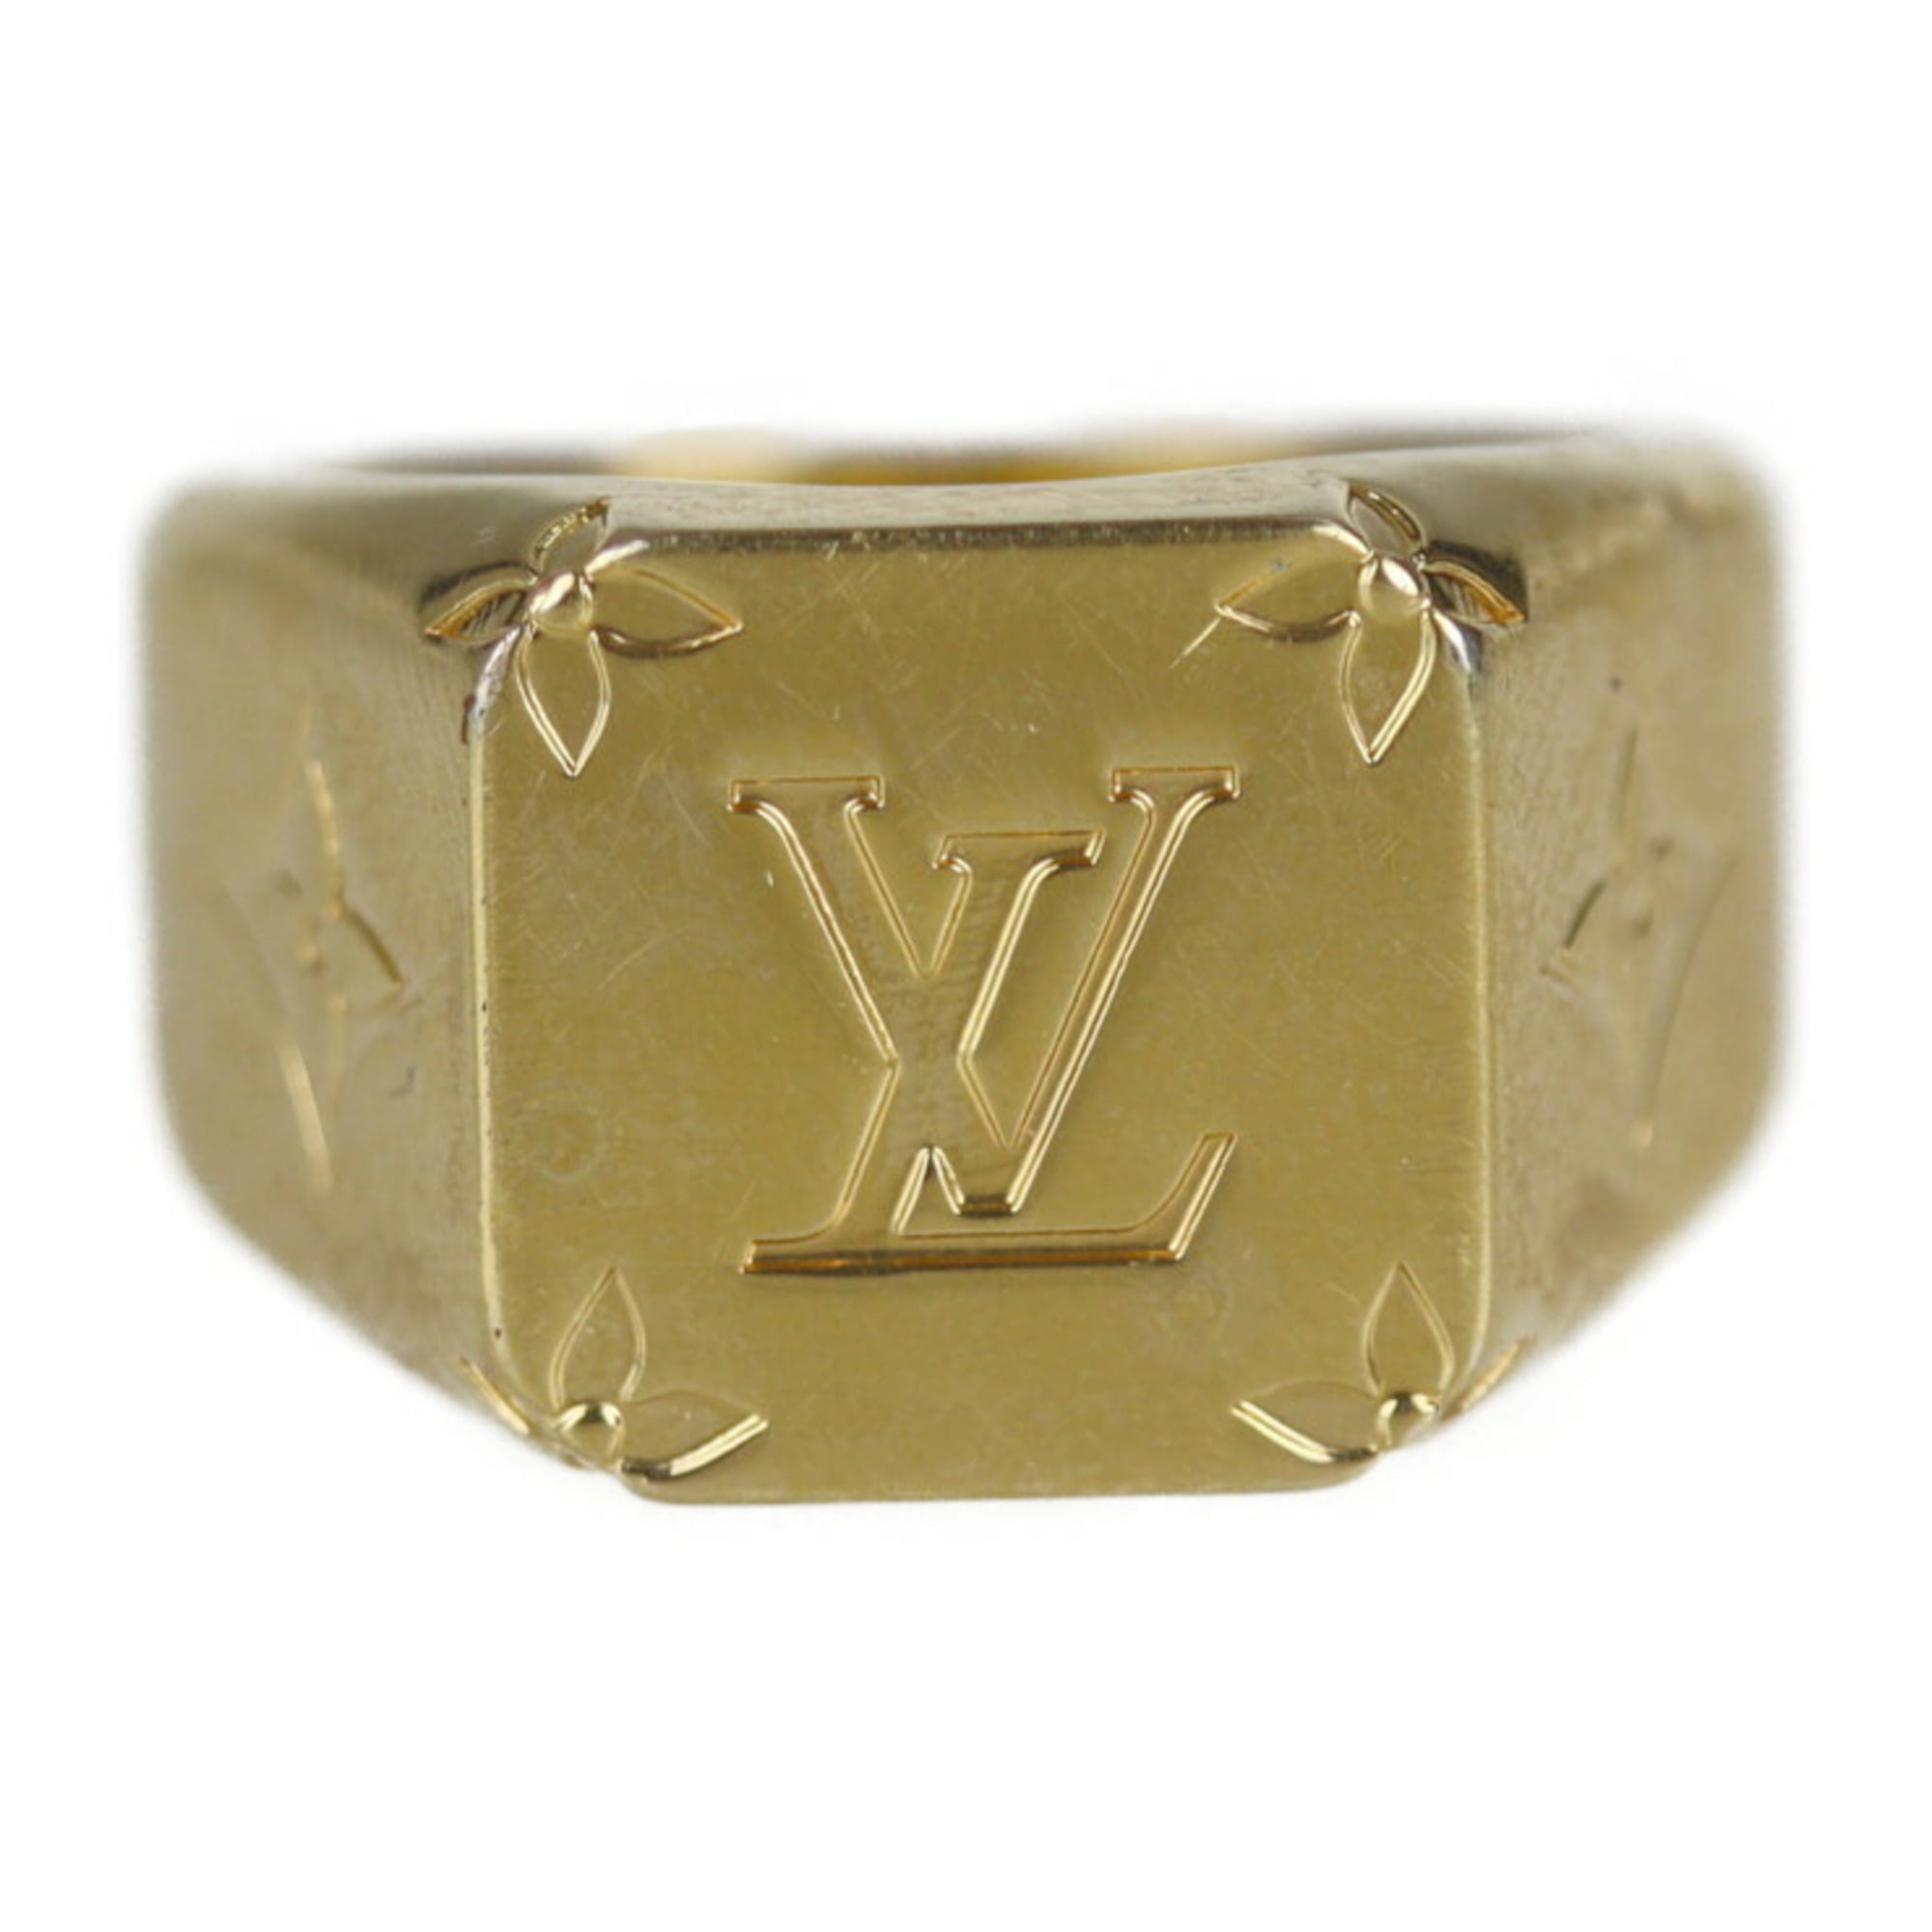 Louis Vuitton Monogram Signet Ring for Sale in College Station, TX